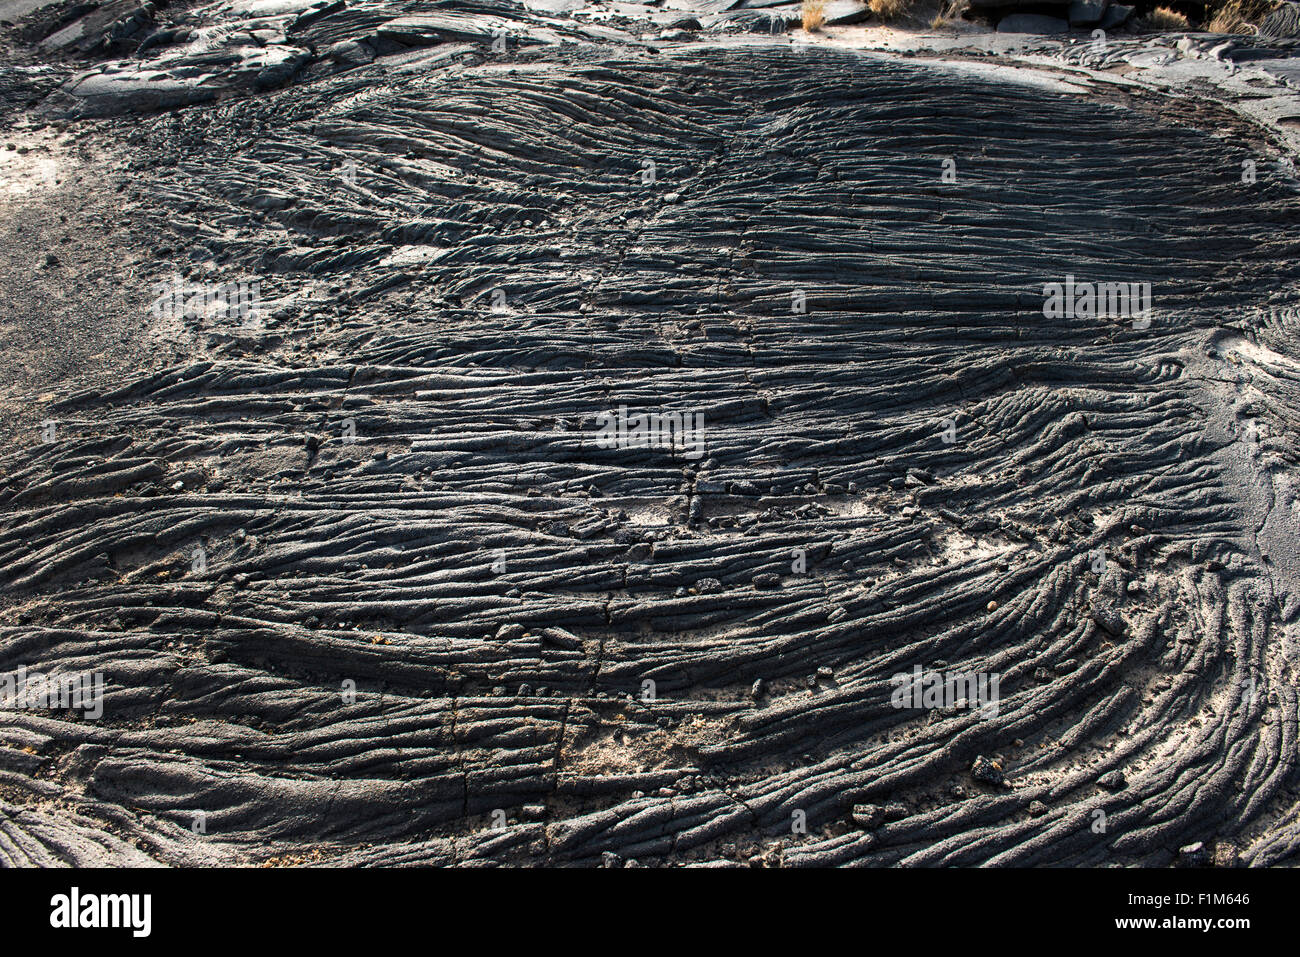 Pahoehoe Lava or Ropy Lava in the Erta Ale volcanic crater. Stock Photo